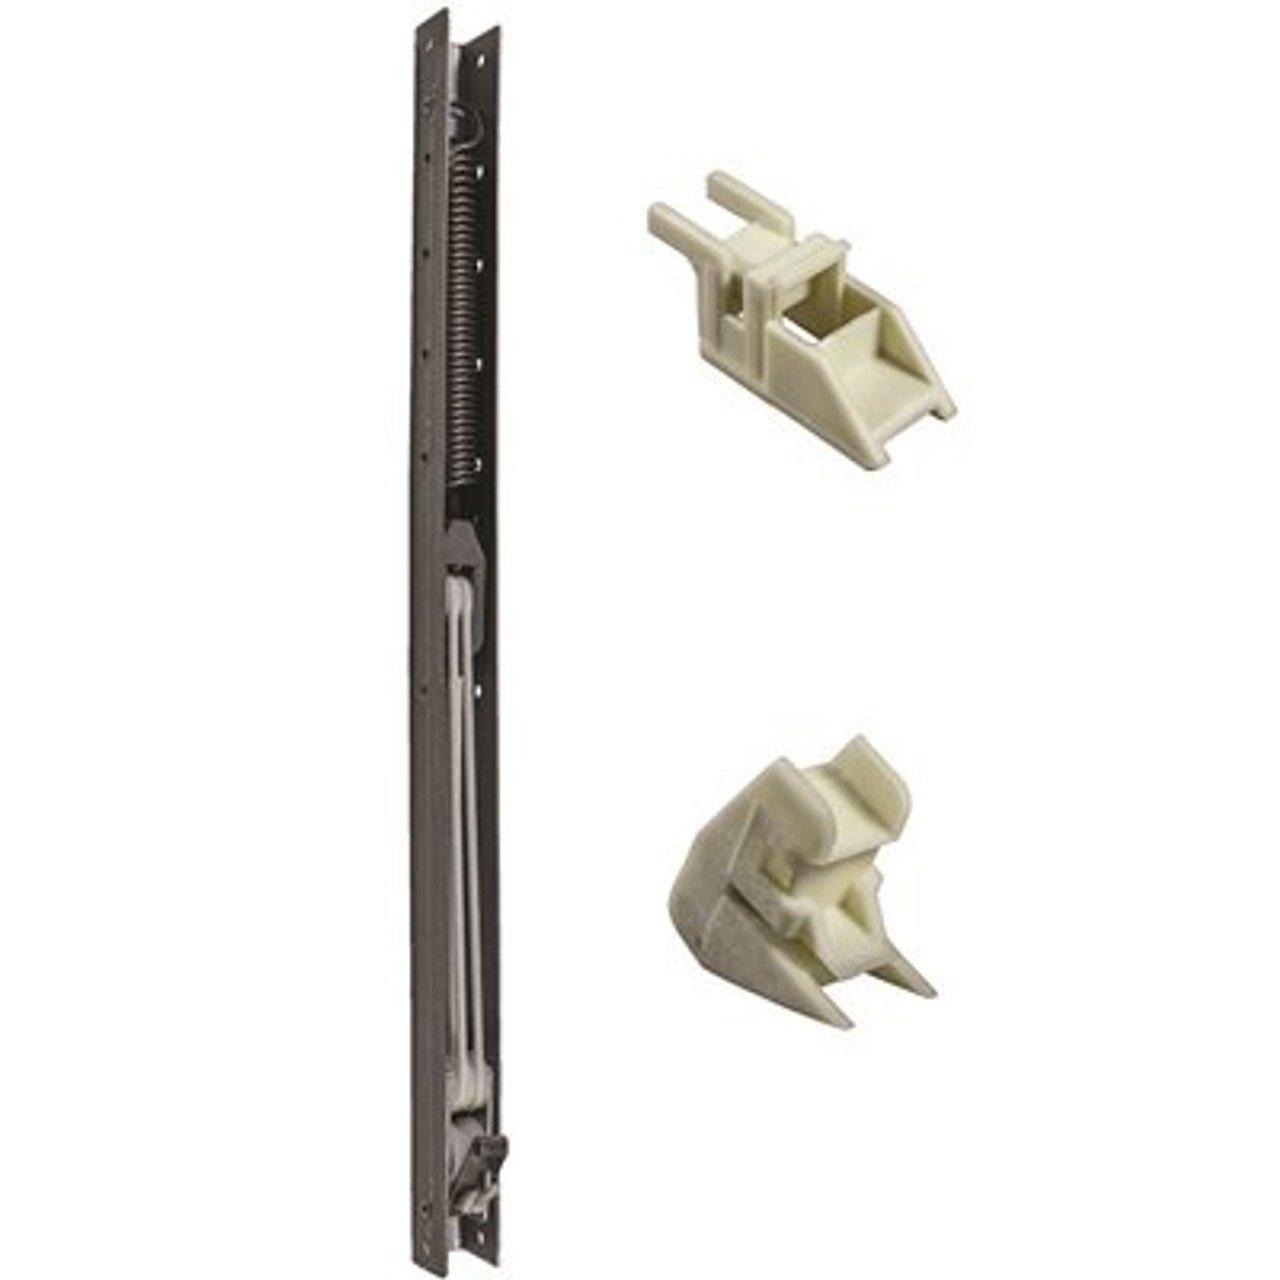 23 In. L Window Channel Balance 2240 With 9/16 In. W X 5/8 In. D Top And Bottom End Brackets Attached - 314413431